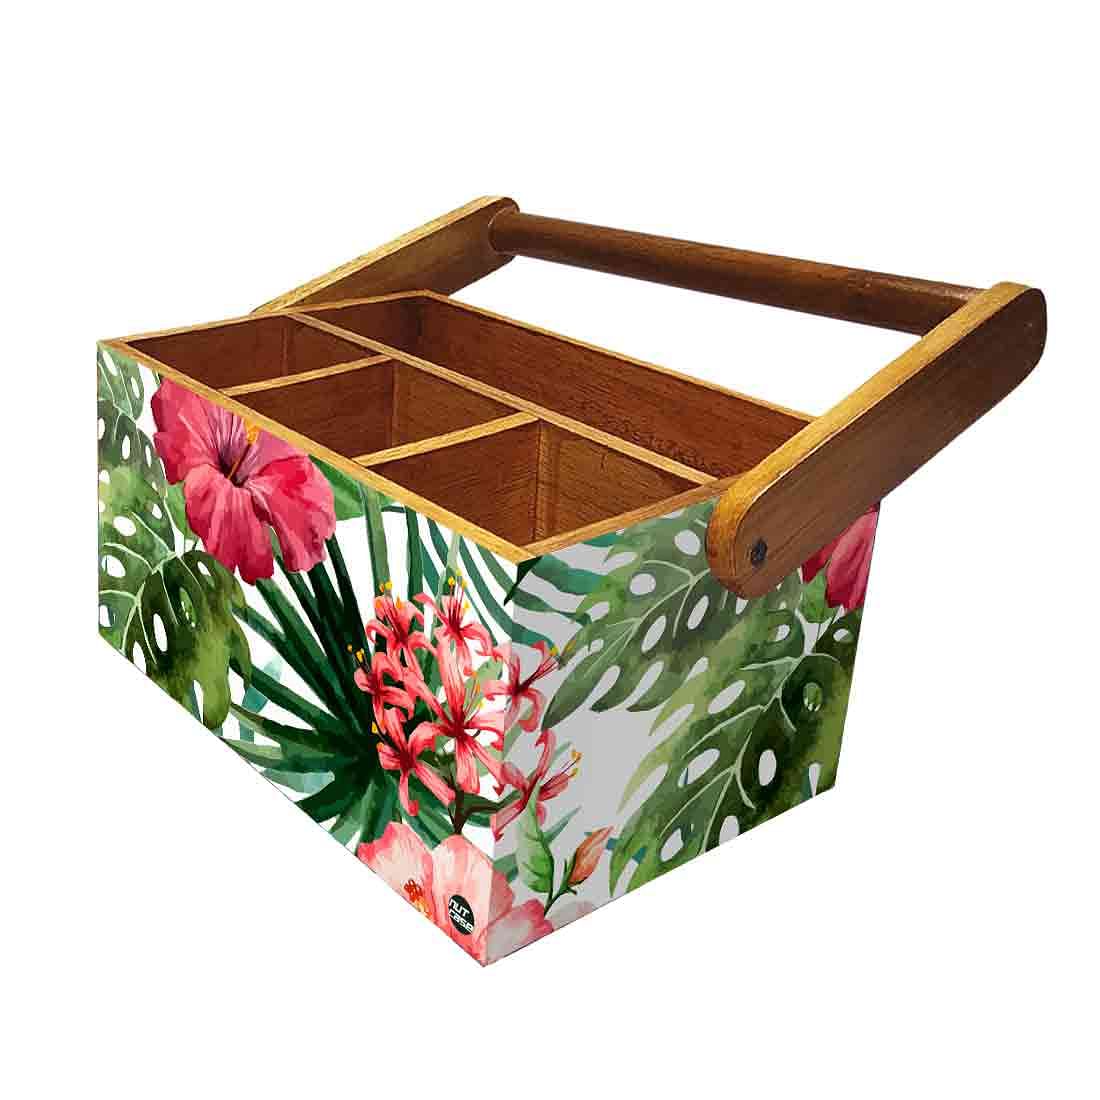 Wooden Tissue and Cutlery Holder for kitchen Organizer With Handle - Hibiscus Nutcase